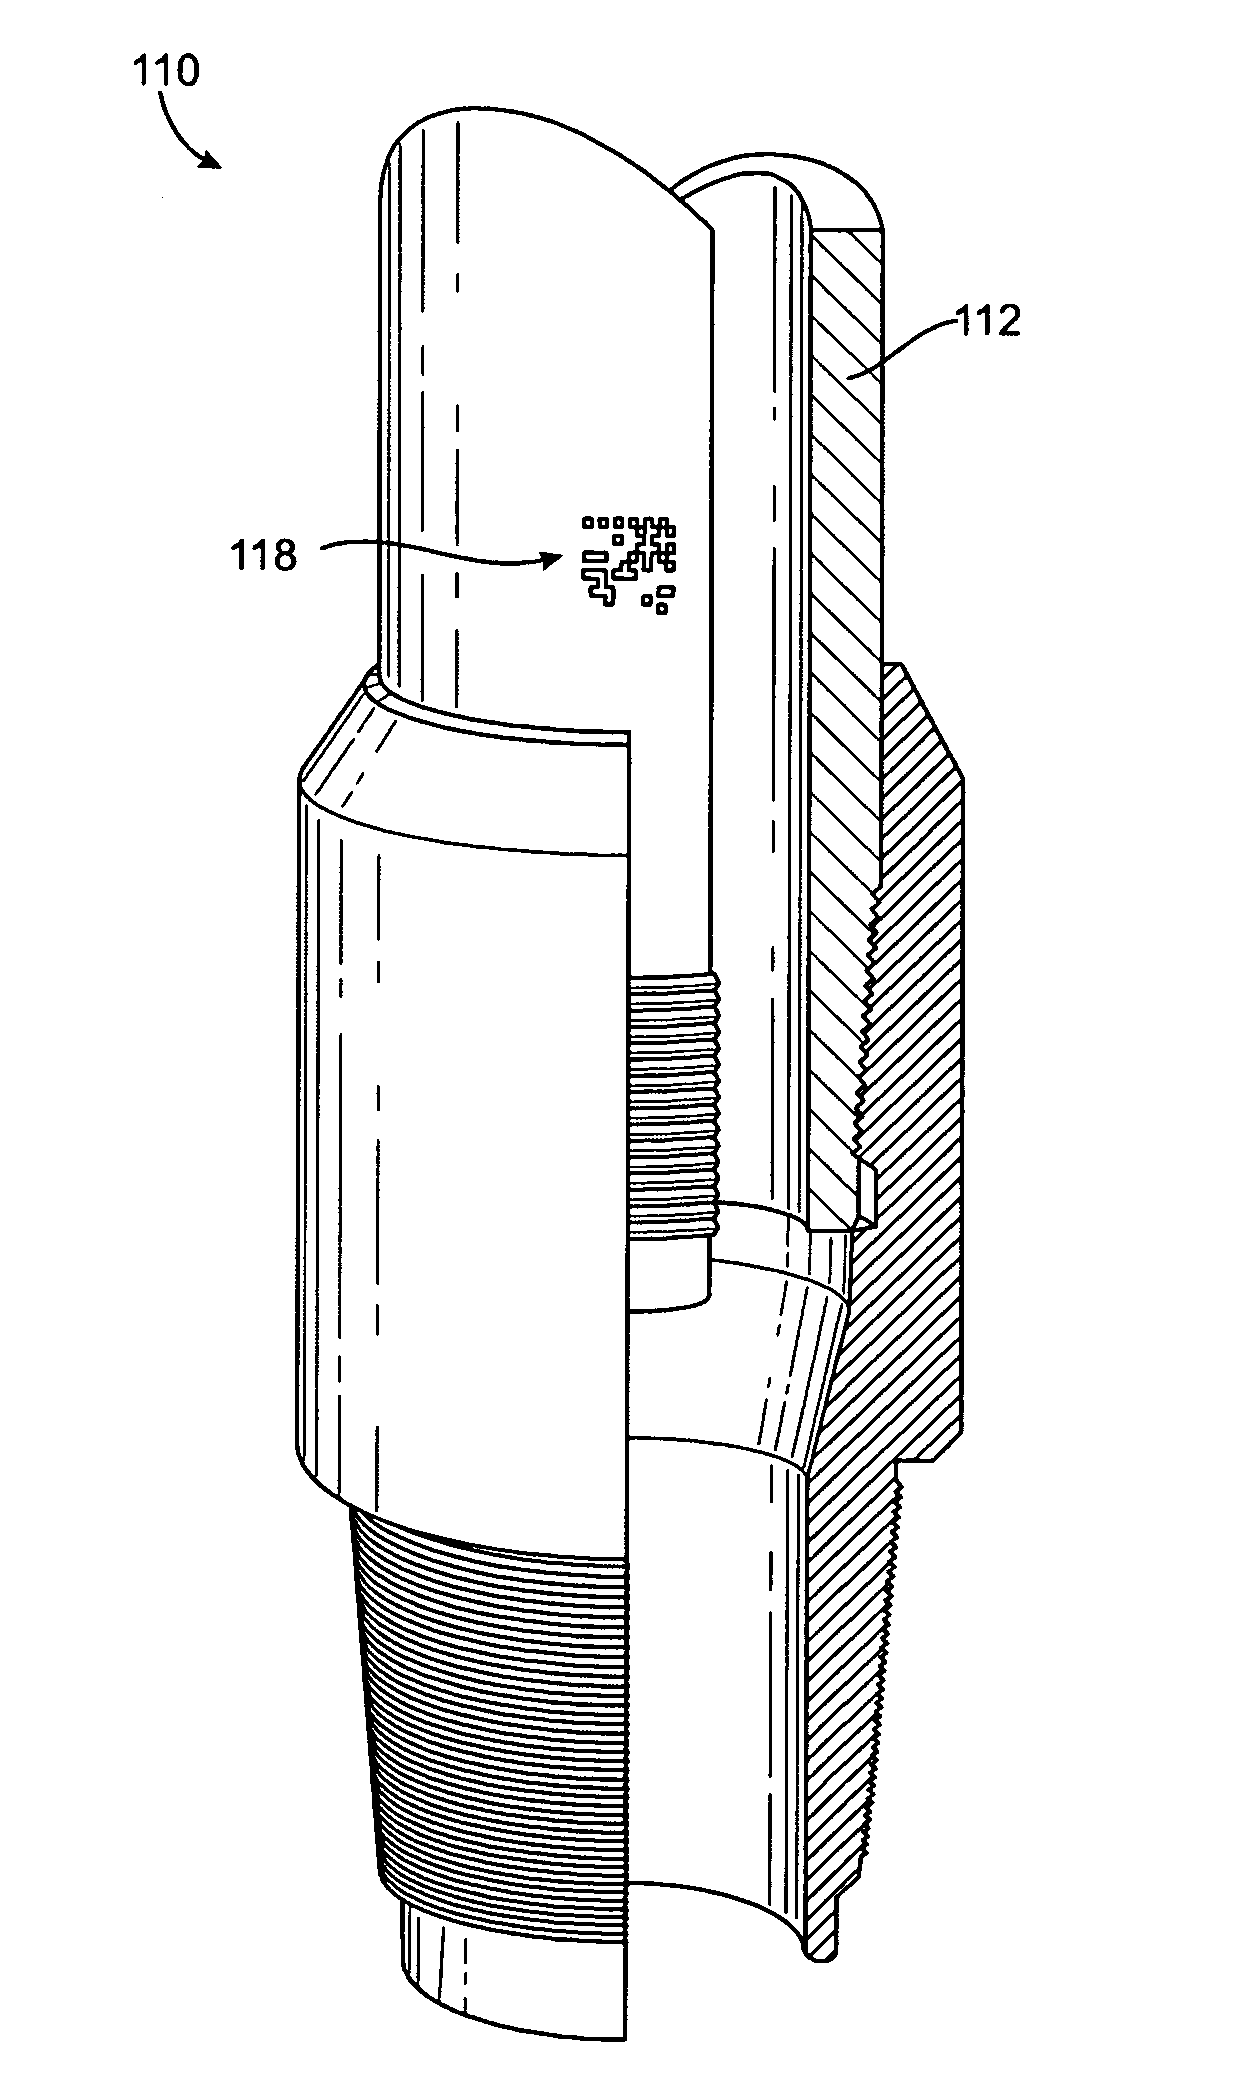 Labeled drill pipe